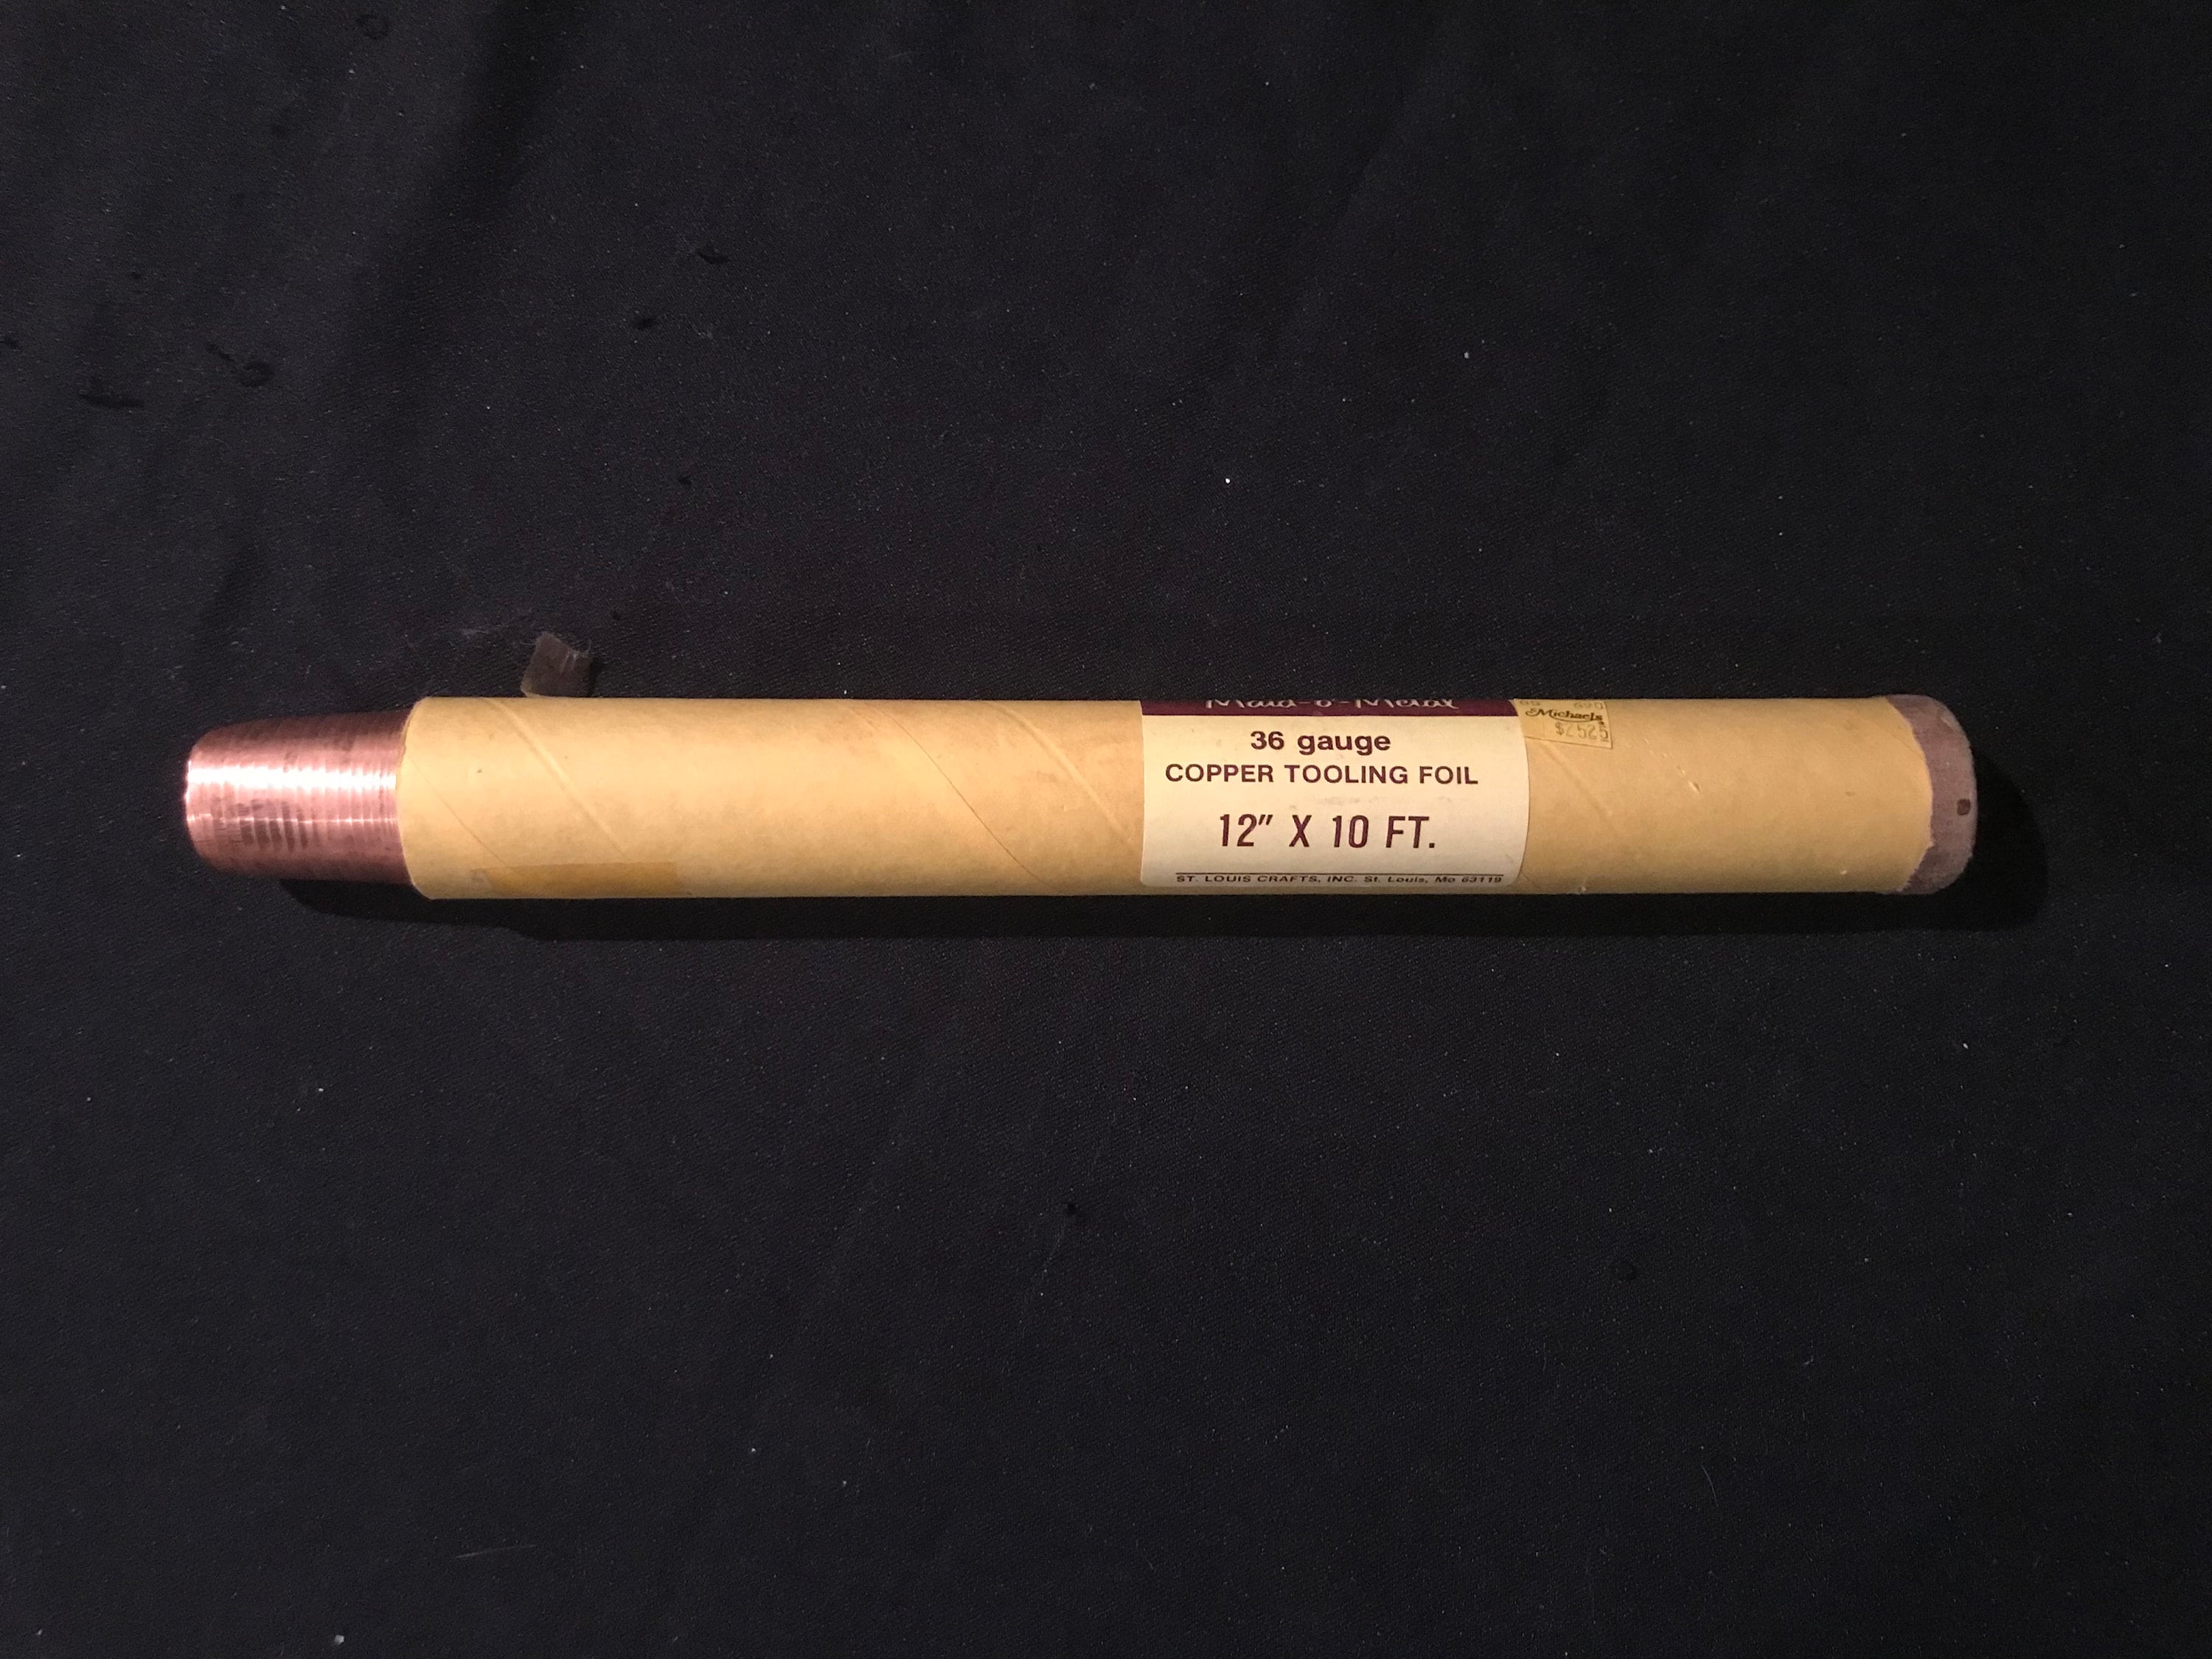 St Louis Crafts 36 Gauge Copper Metal Foil Roll 12 Inches x 10 Feet